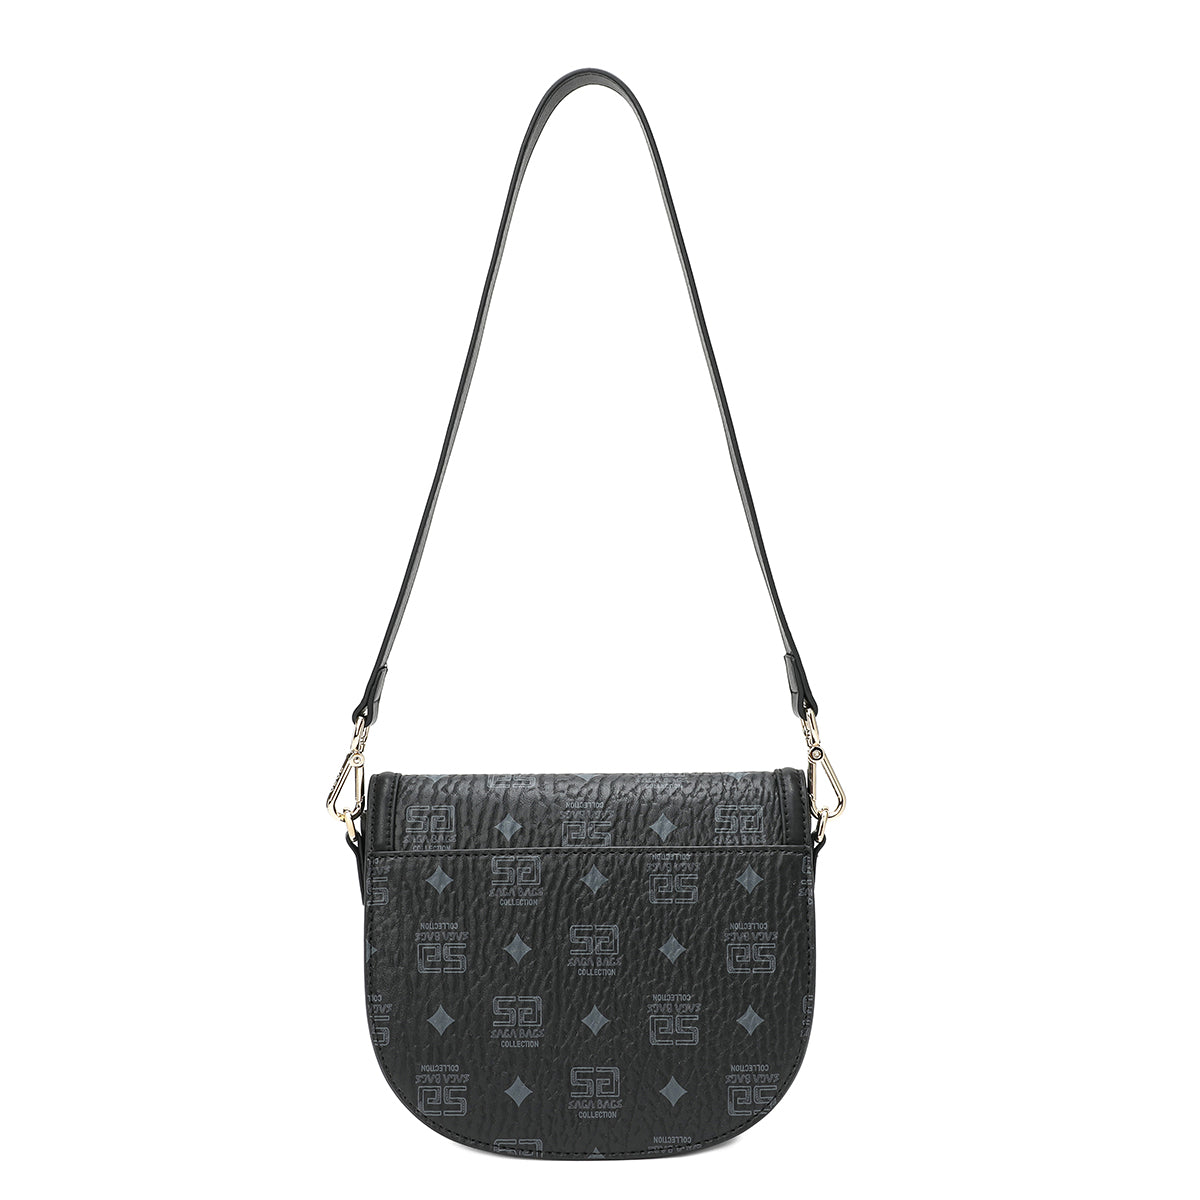 Luxurious and practical bag with an elegant golden lock, black color